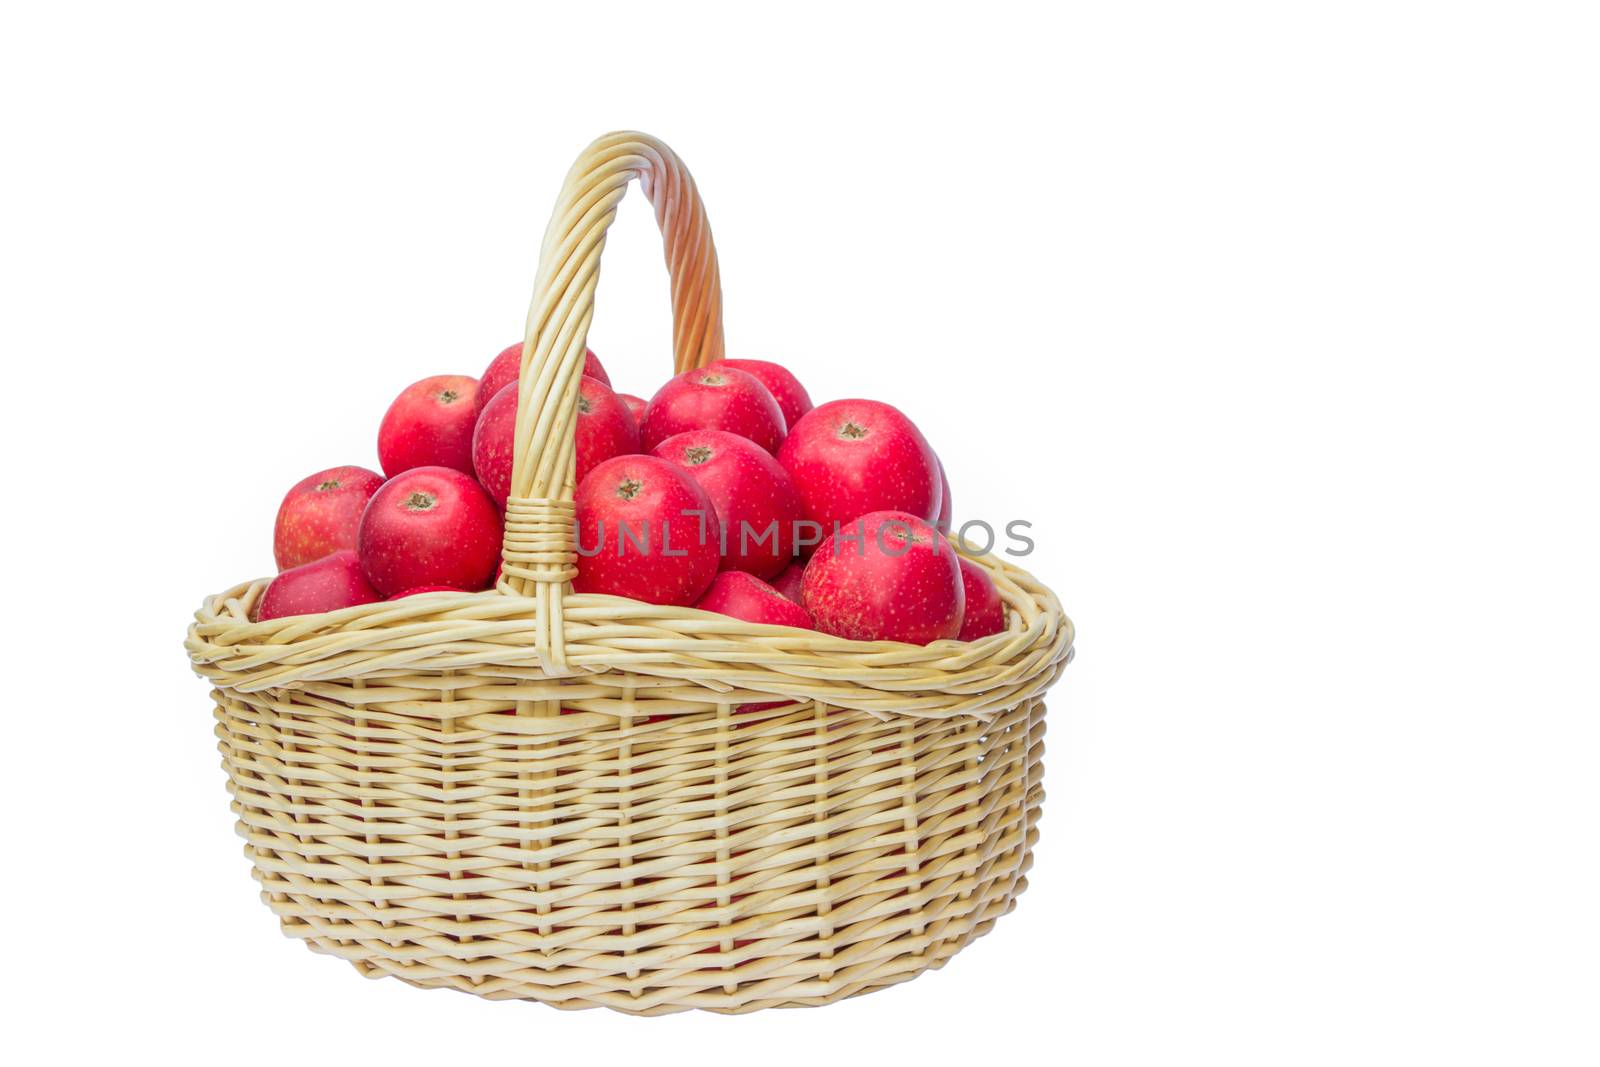 Full basket with many stacked red apples isolated on white background